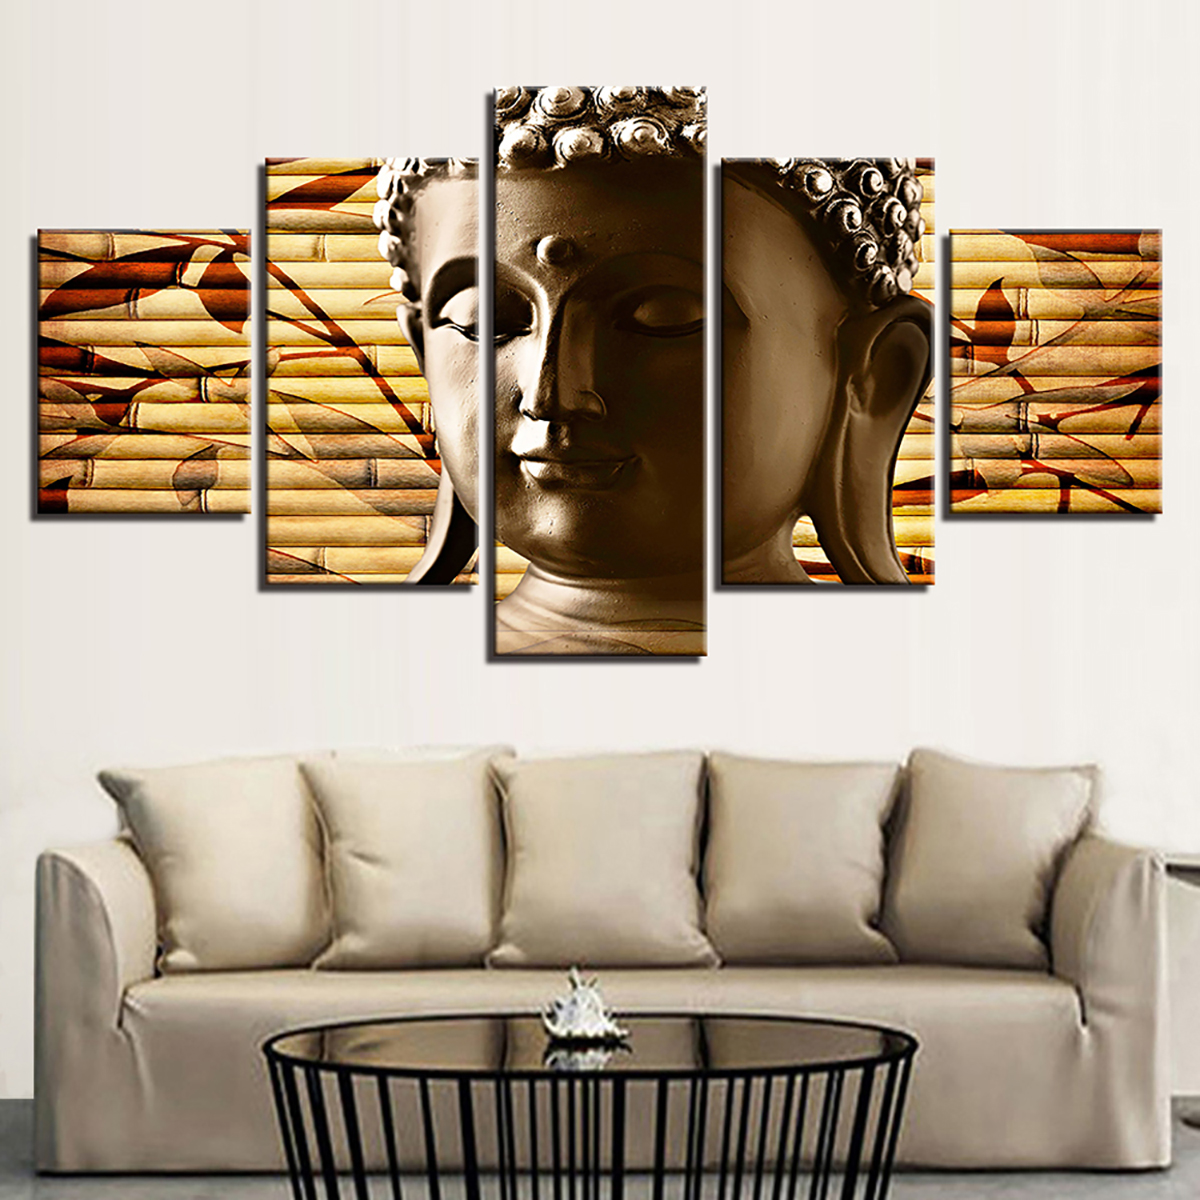 5Pcs-Canvas-Print-Paintings-Scenery-Oil-Painting-Wall-Decorative-Printing-Art-Picture-Frameless-Home-1758668-7